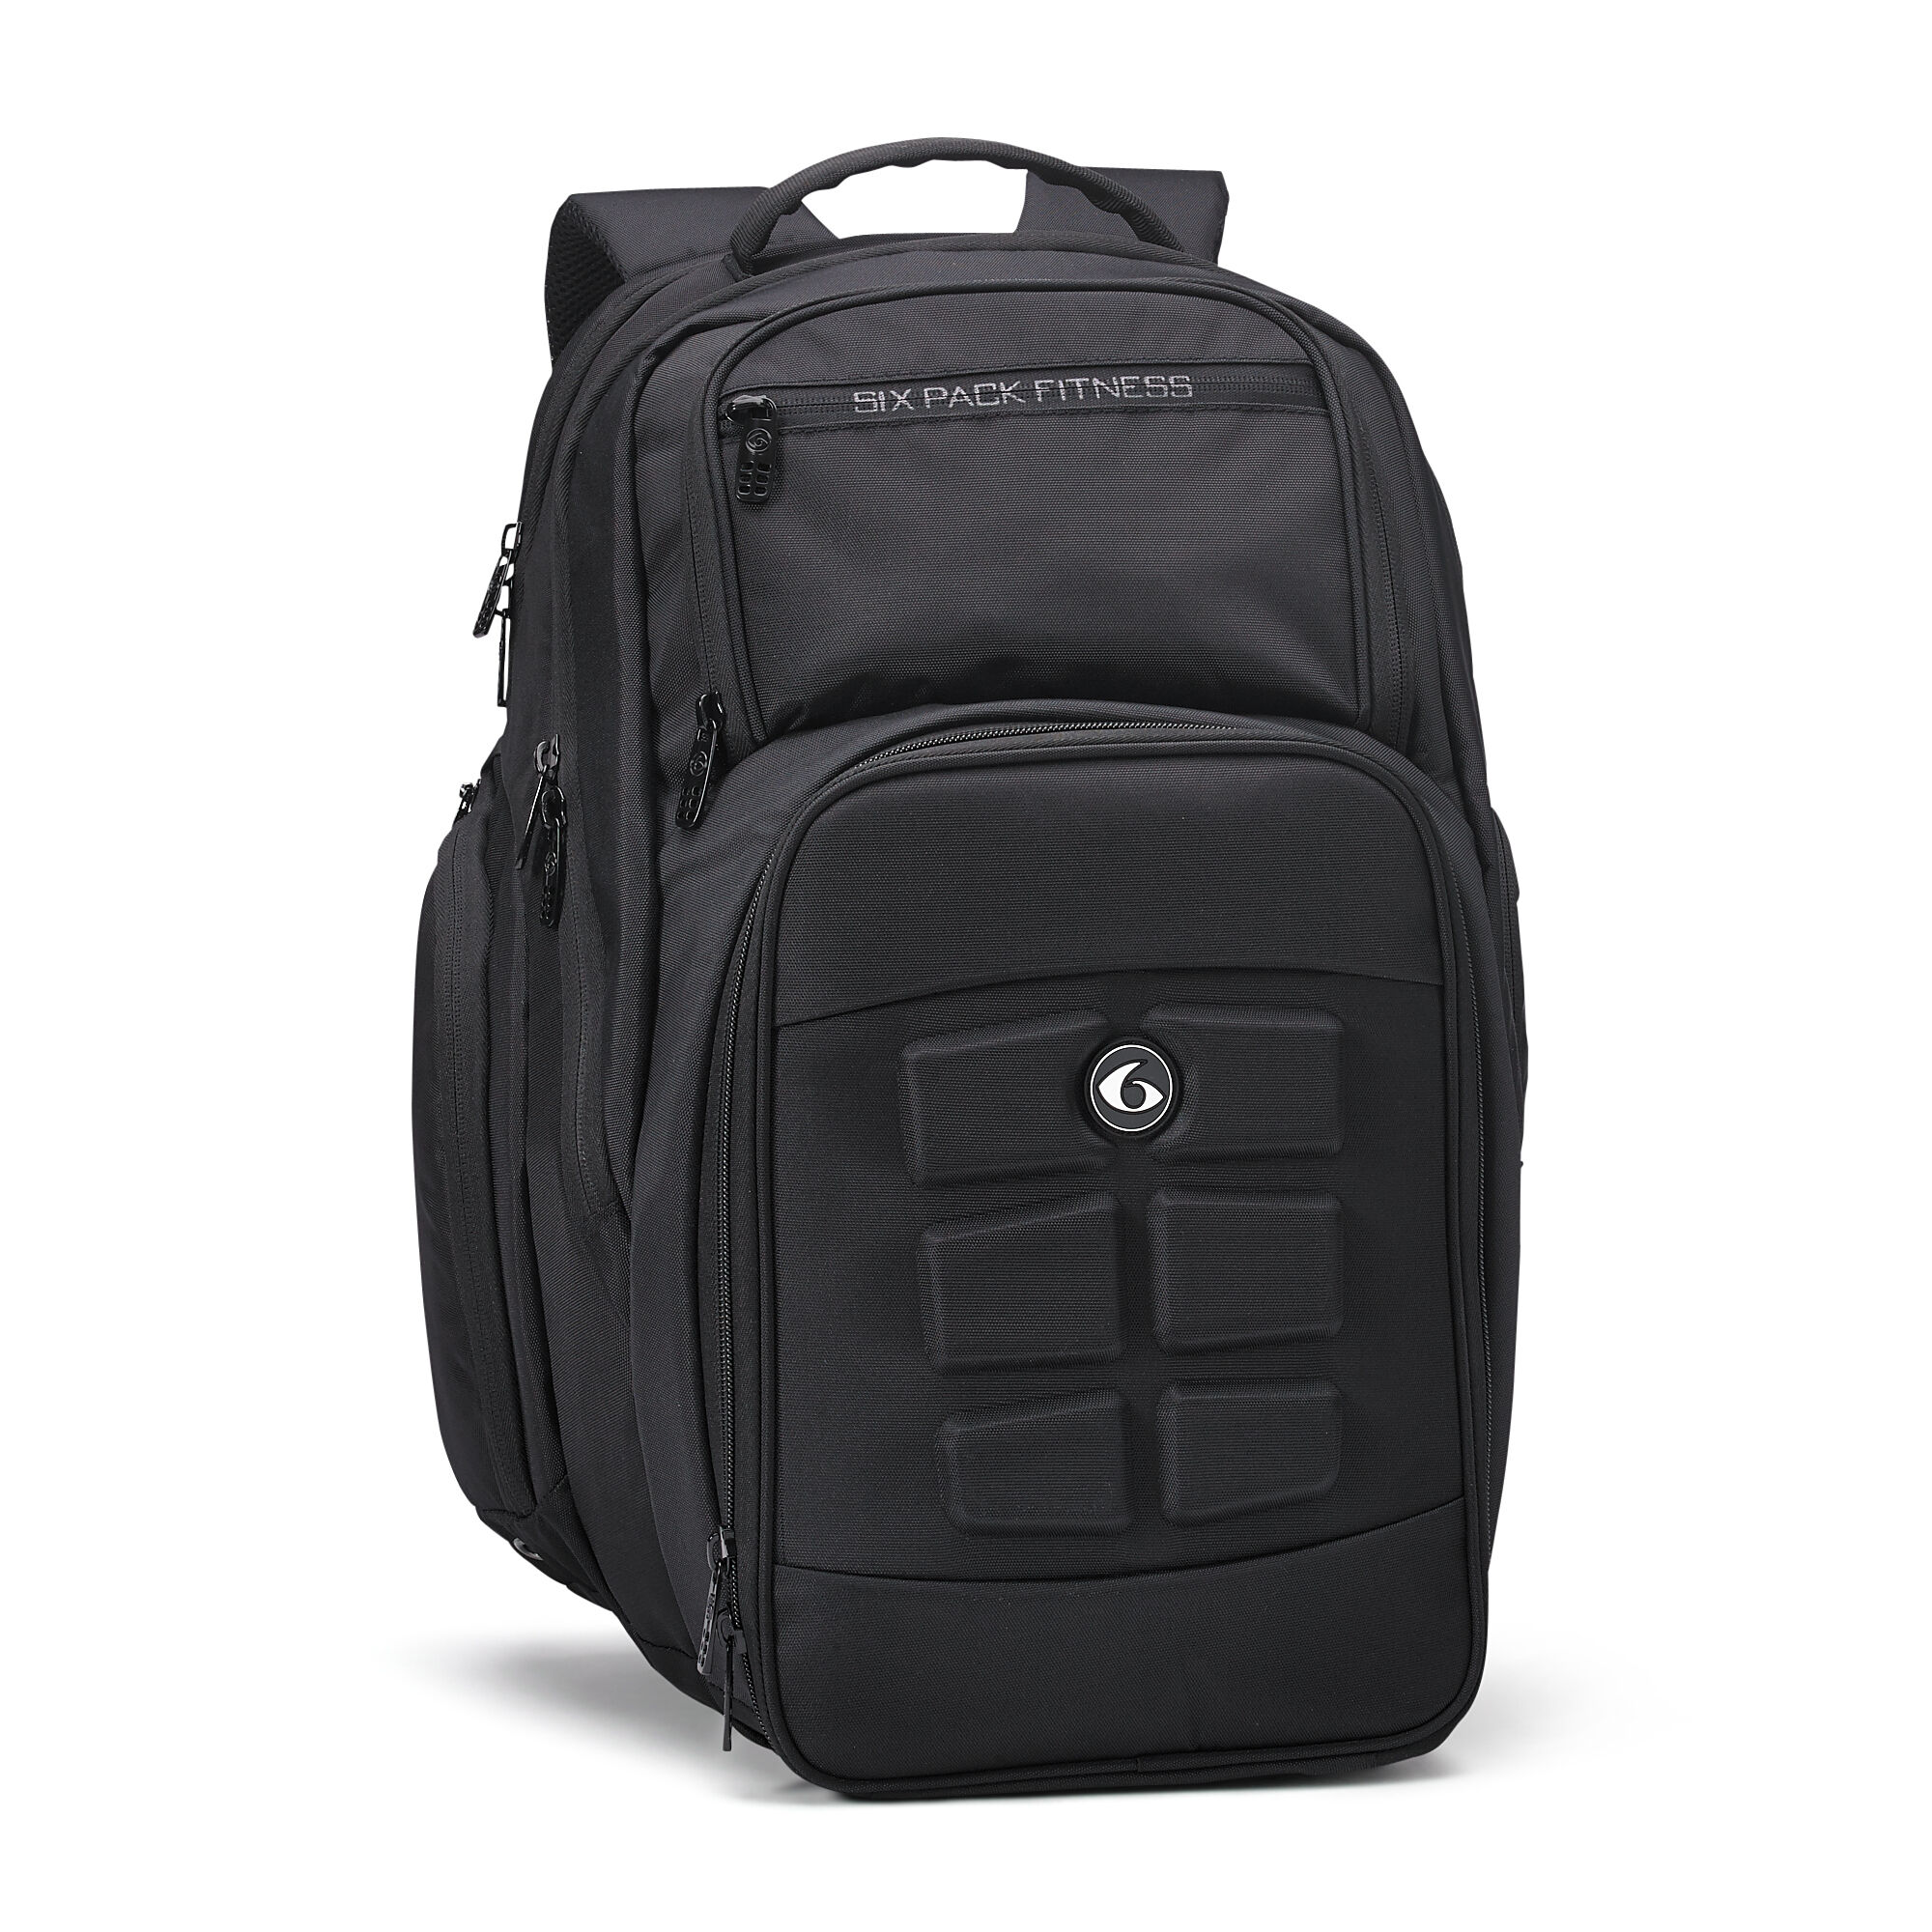 6 Pack Fitness Expedition Backpack 500 - Stealth | eBay